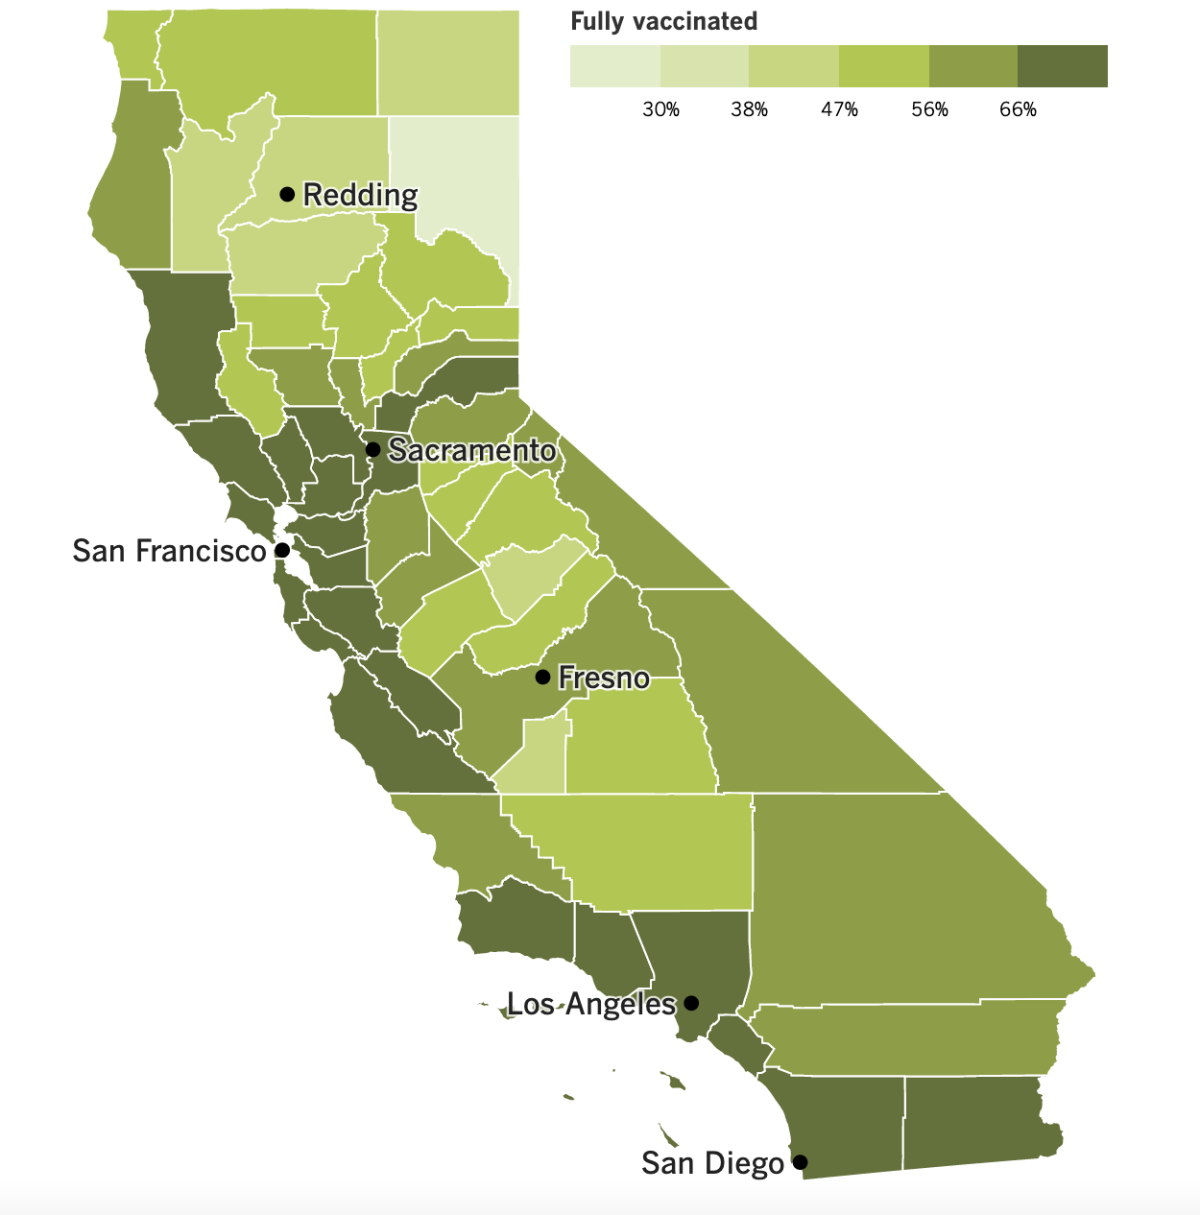 A map showing California's vaccination progress as of March 1, 2022.